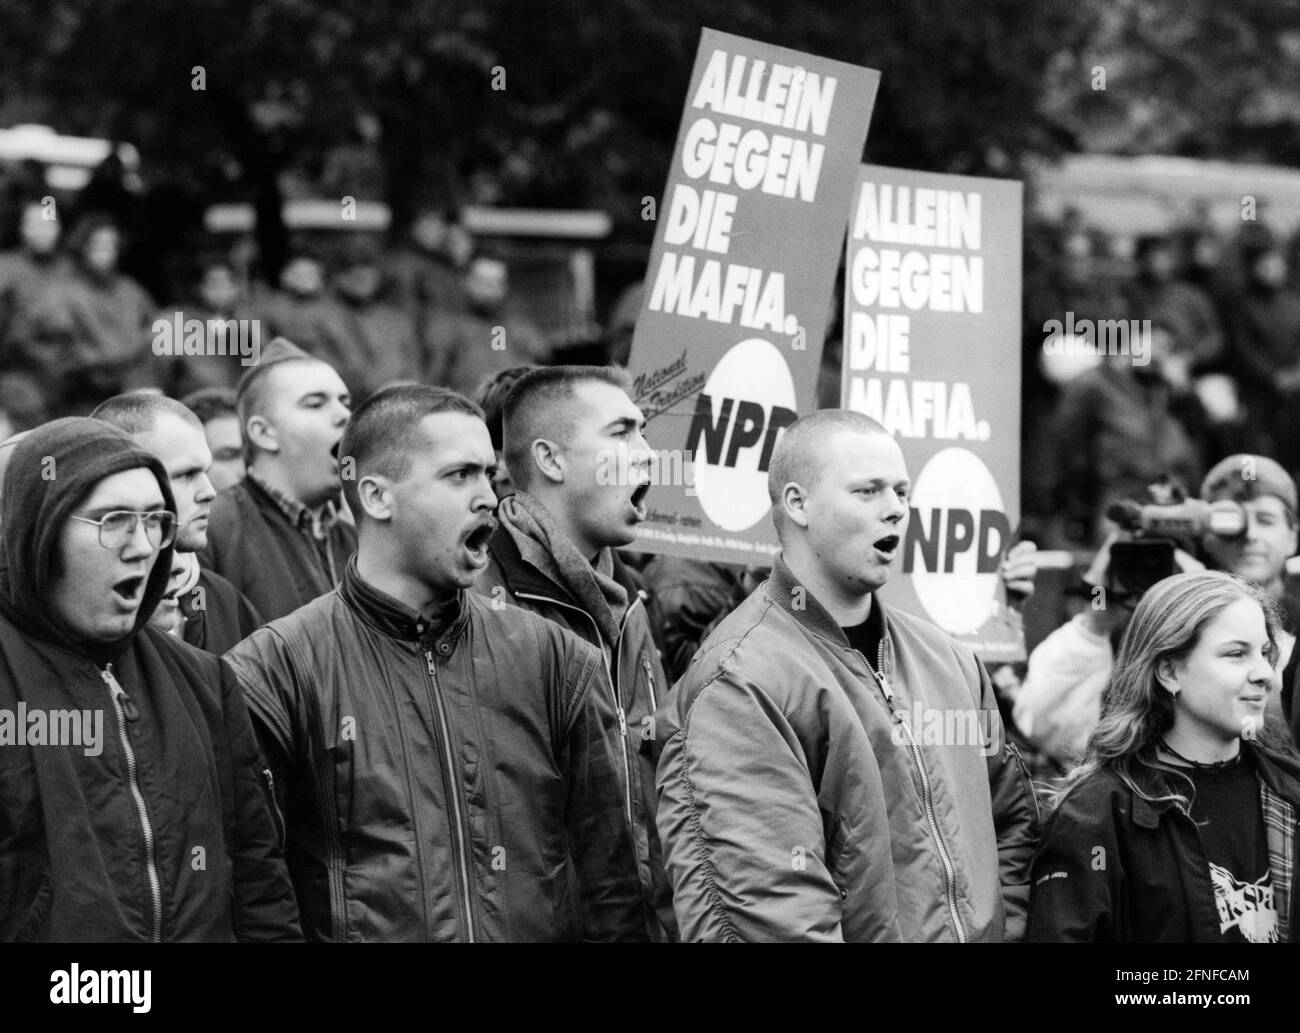 "Participants of a NPD demonstration in Bonn. They hold up placards that read ""Alone against the Mafia. NPD"" [automated translation]" Stock Photo